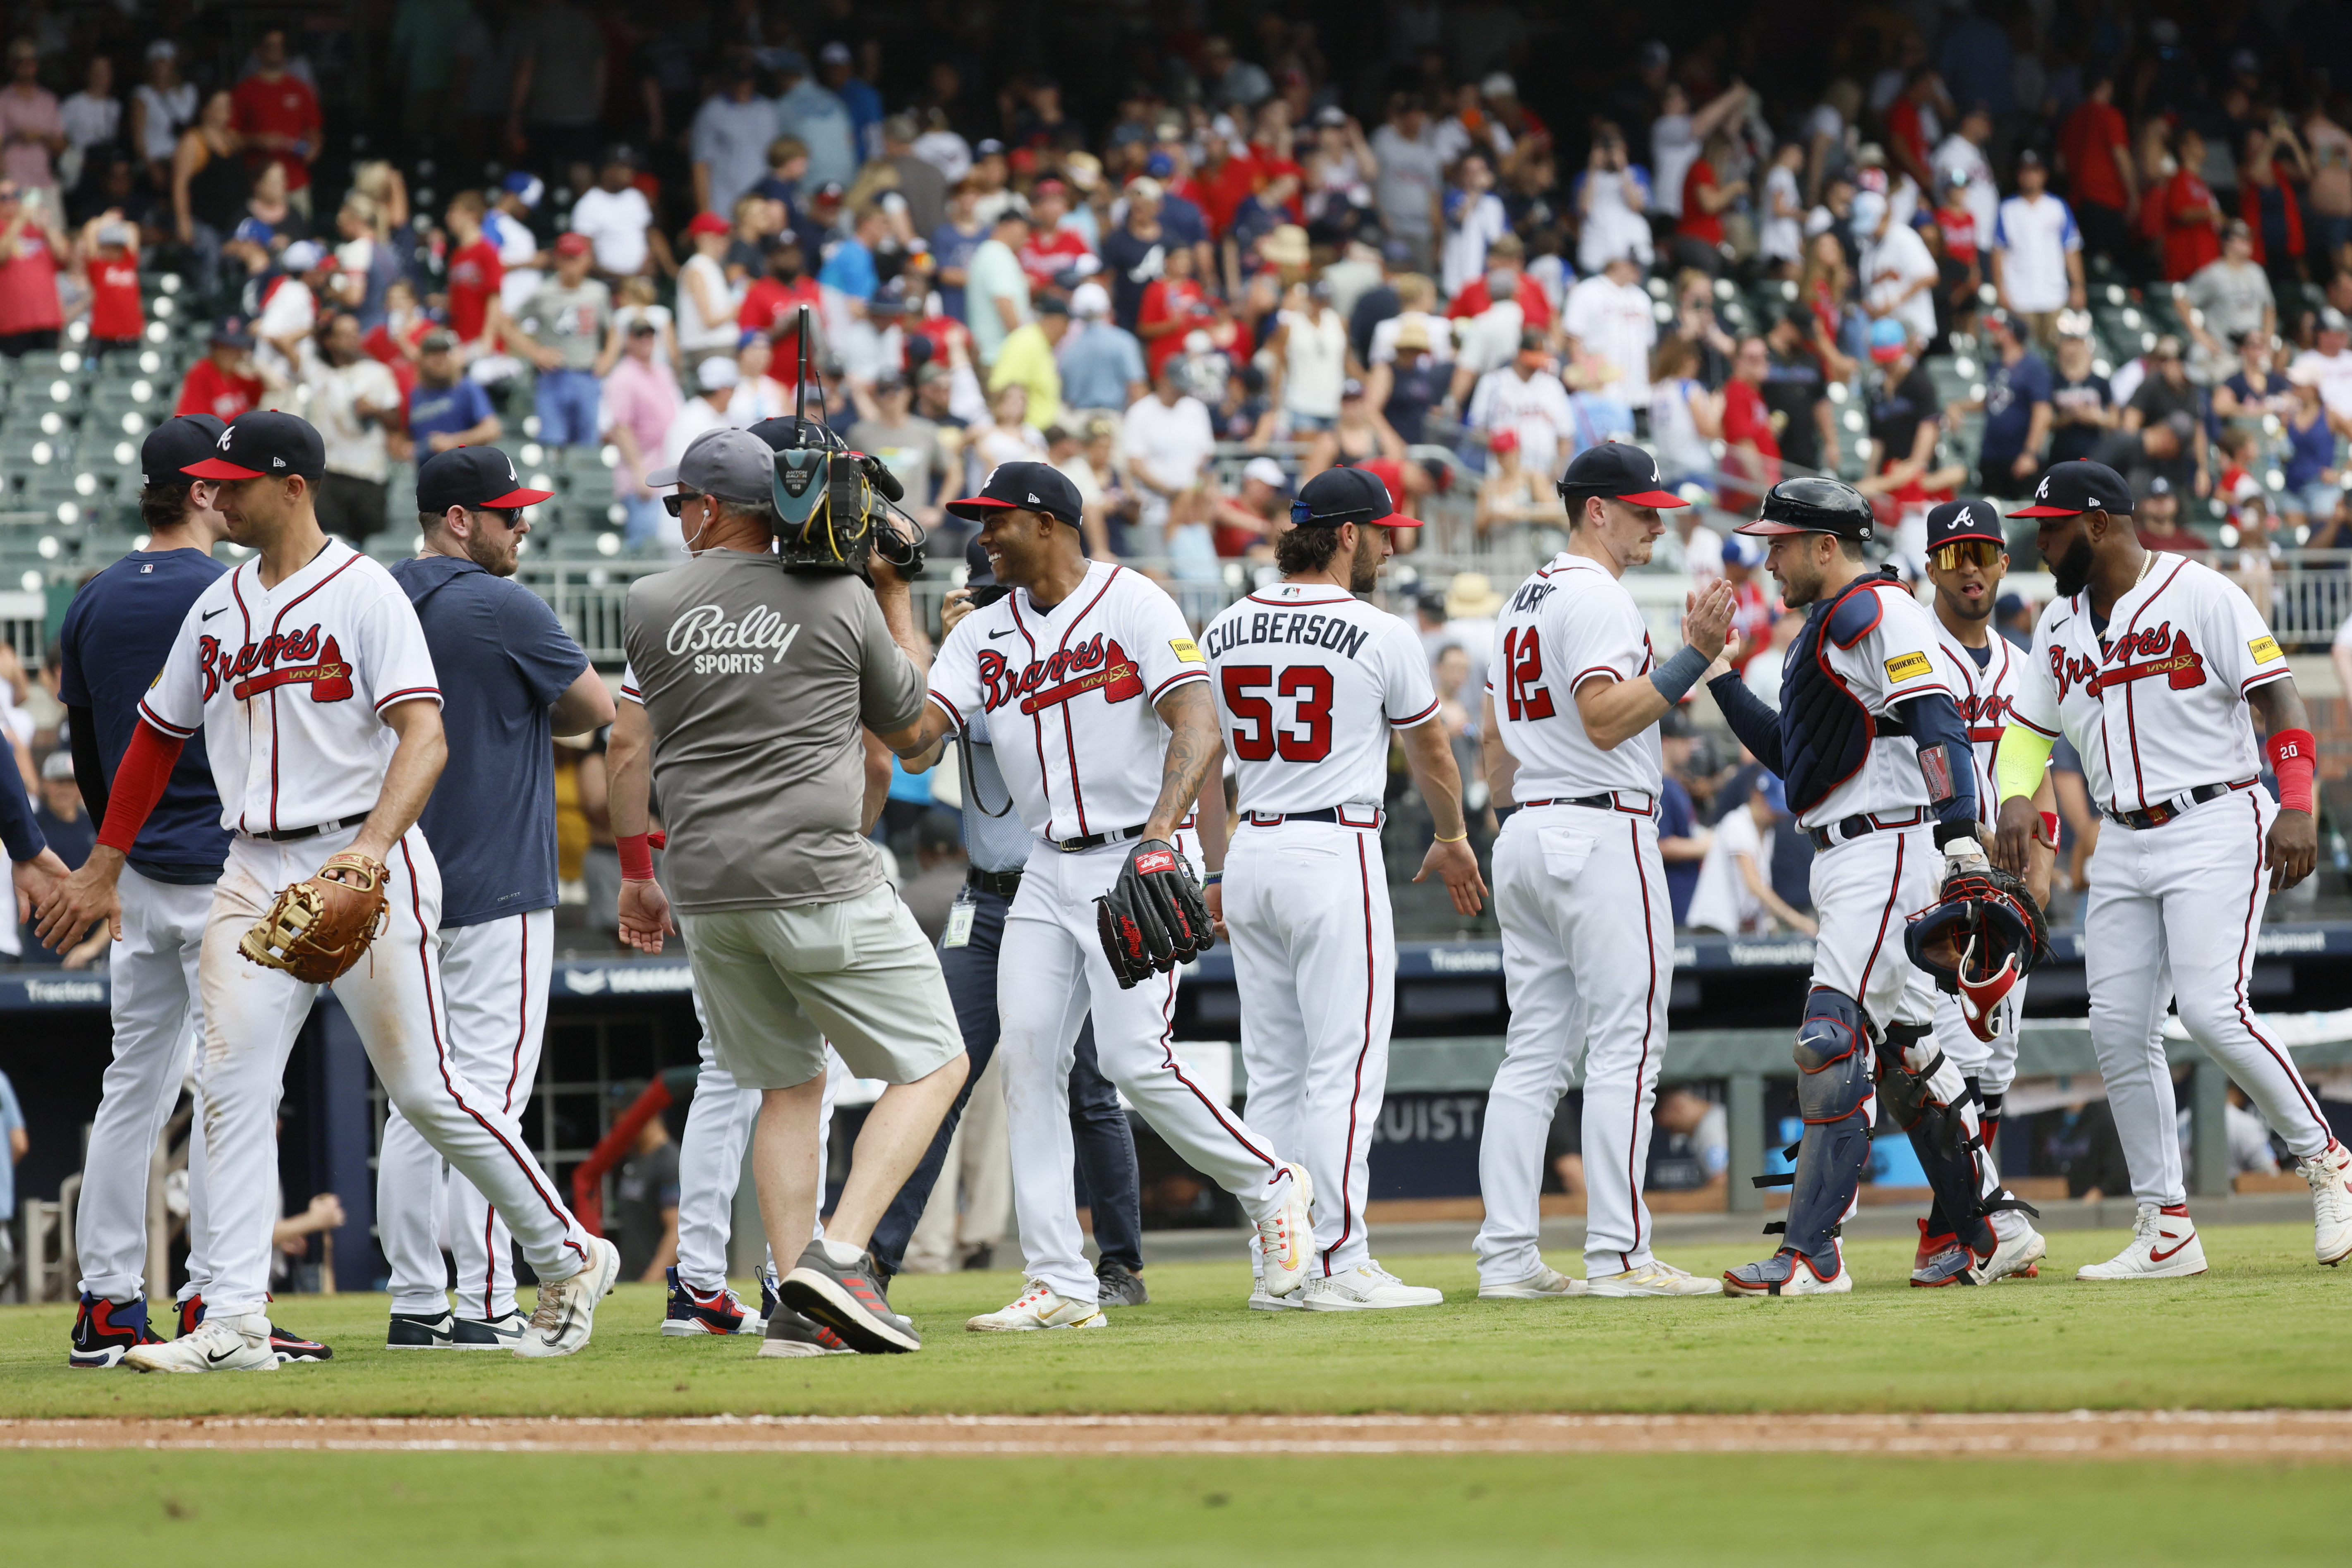 Braves All-Star roster domination is even better than you realize